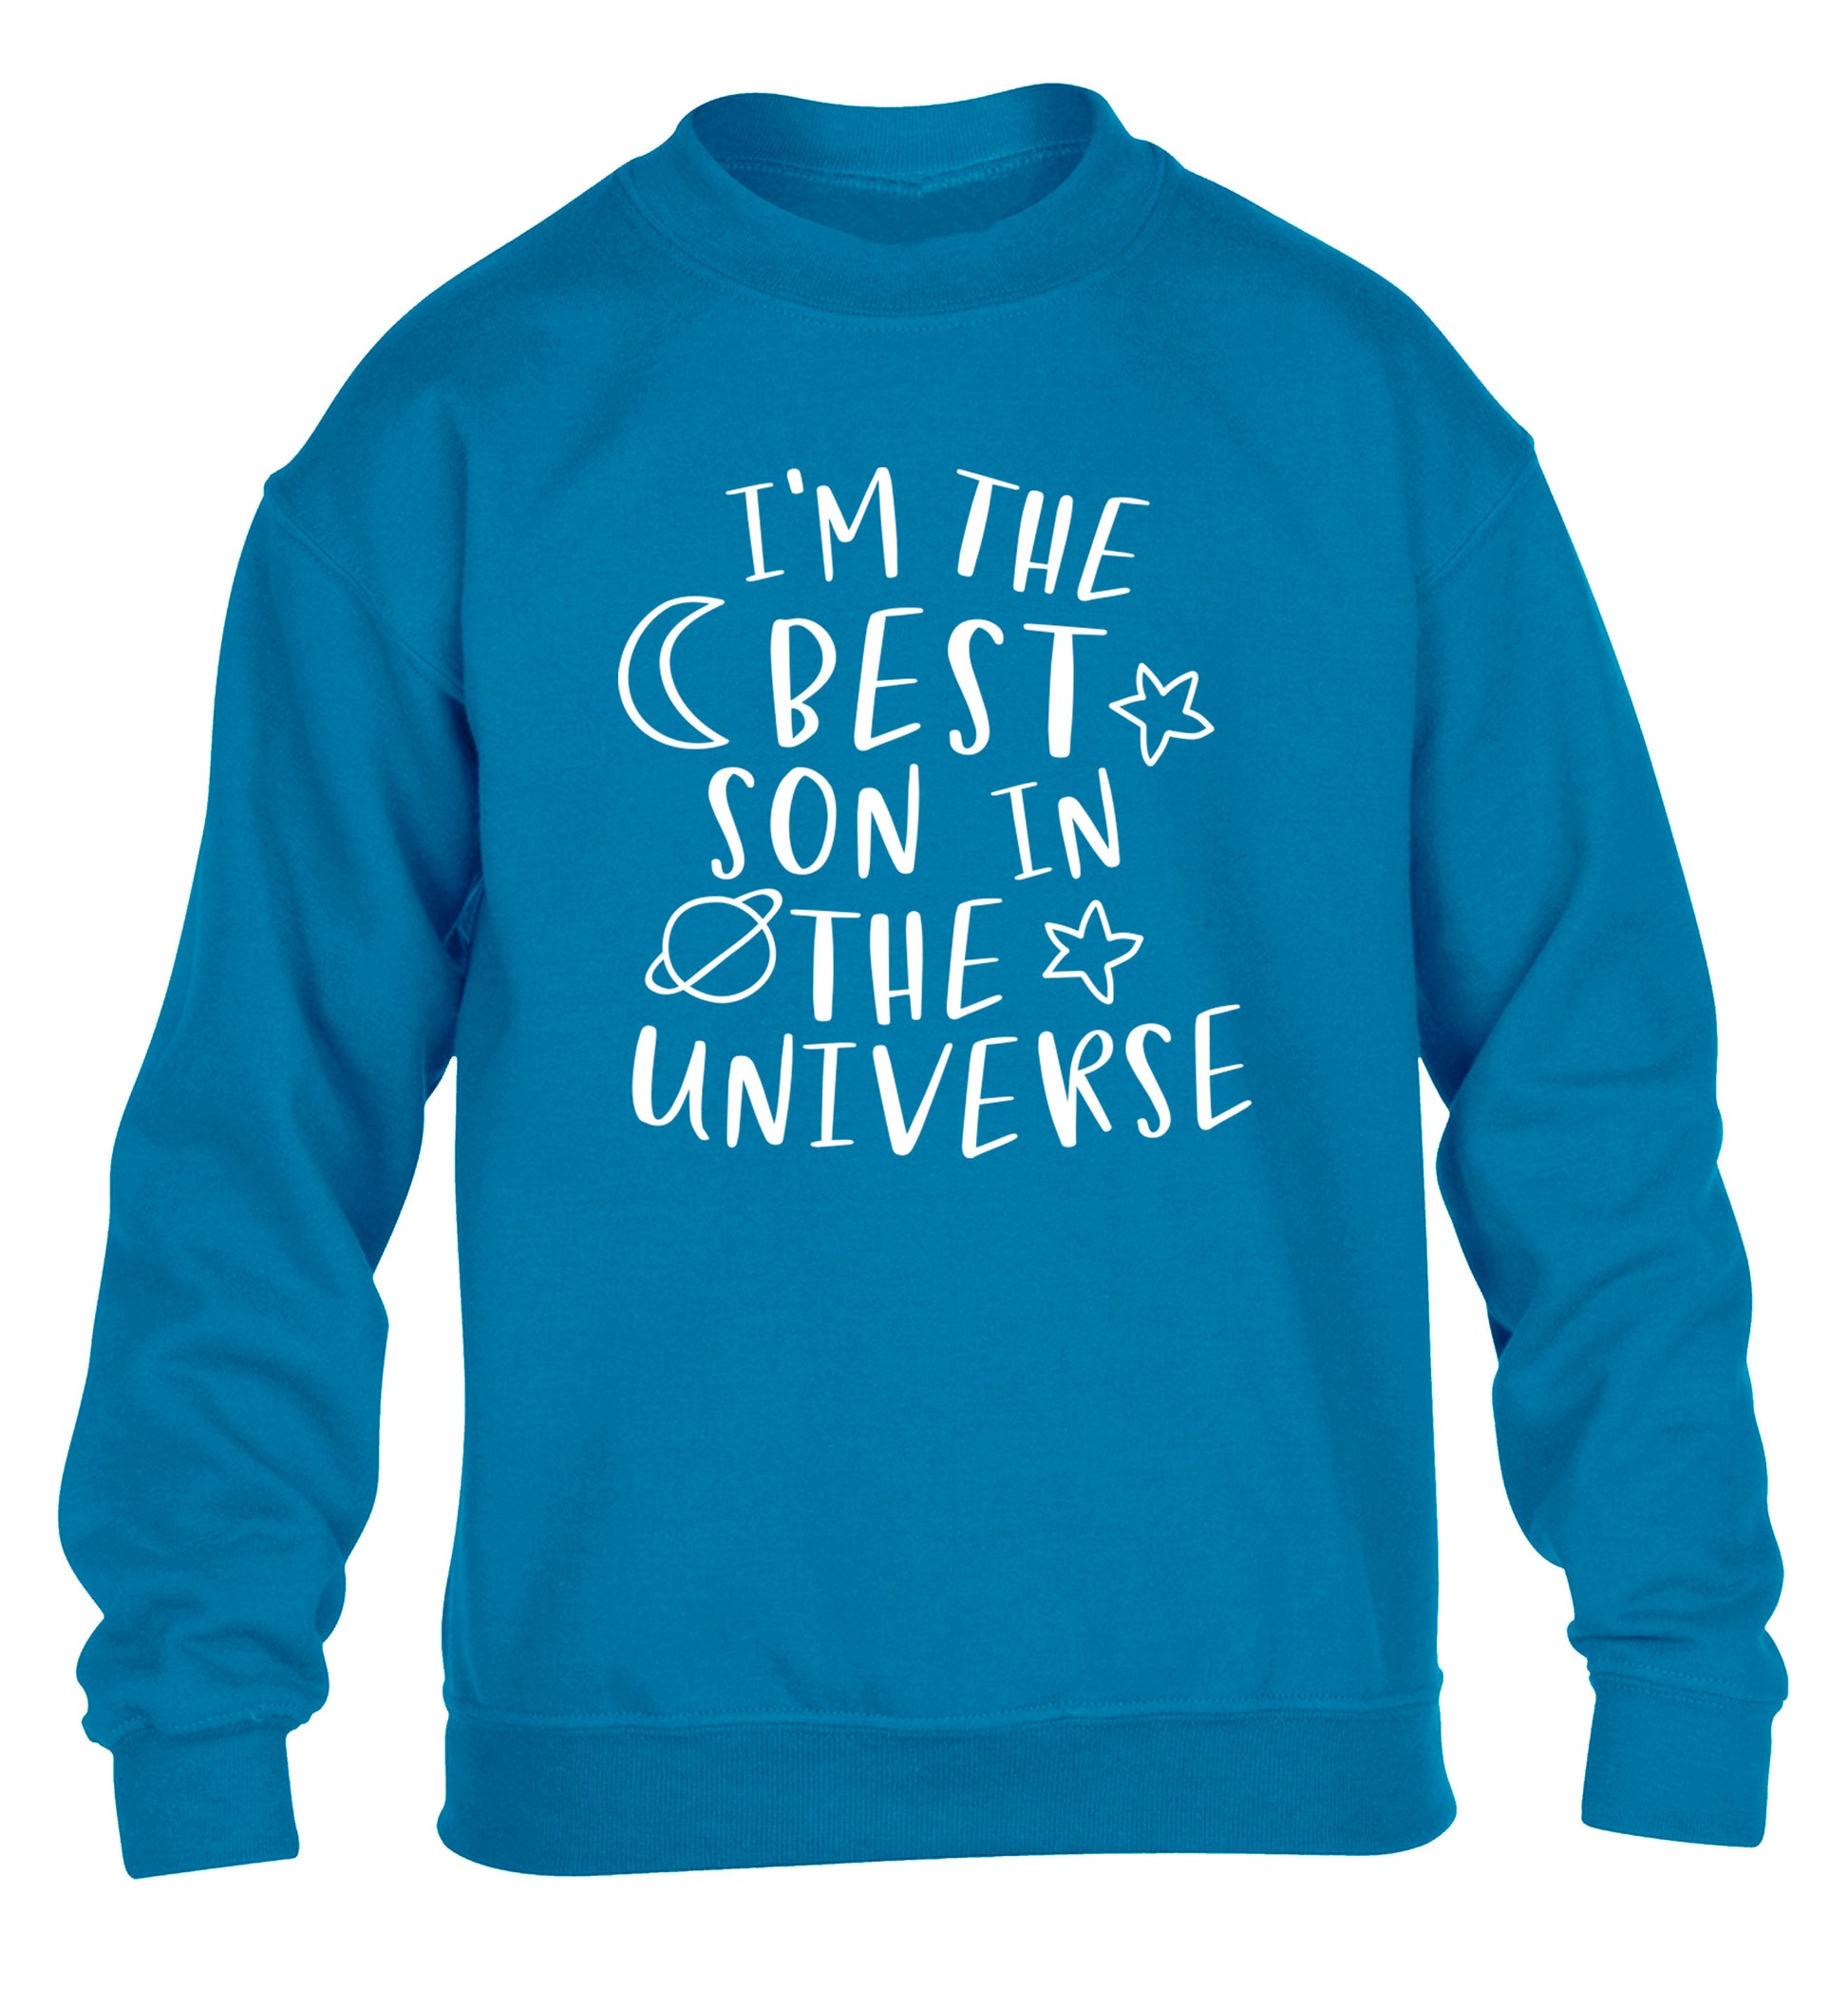 I'm the best son in the universe children's blue sweater 12-13 Years